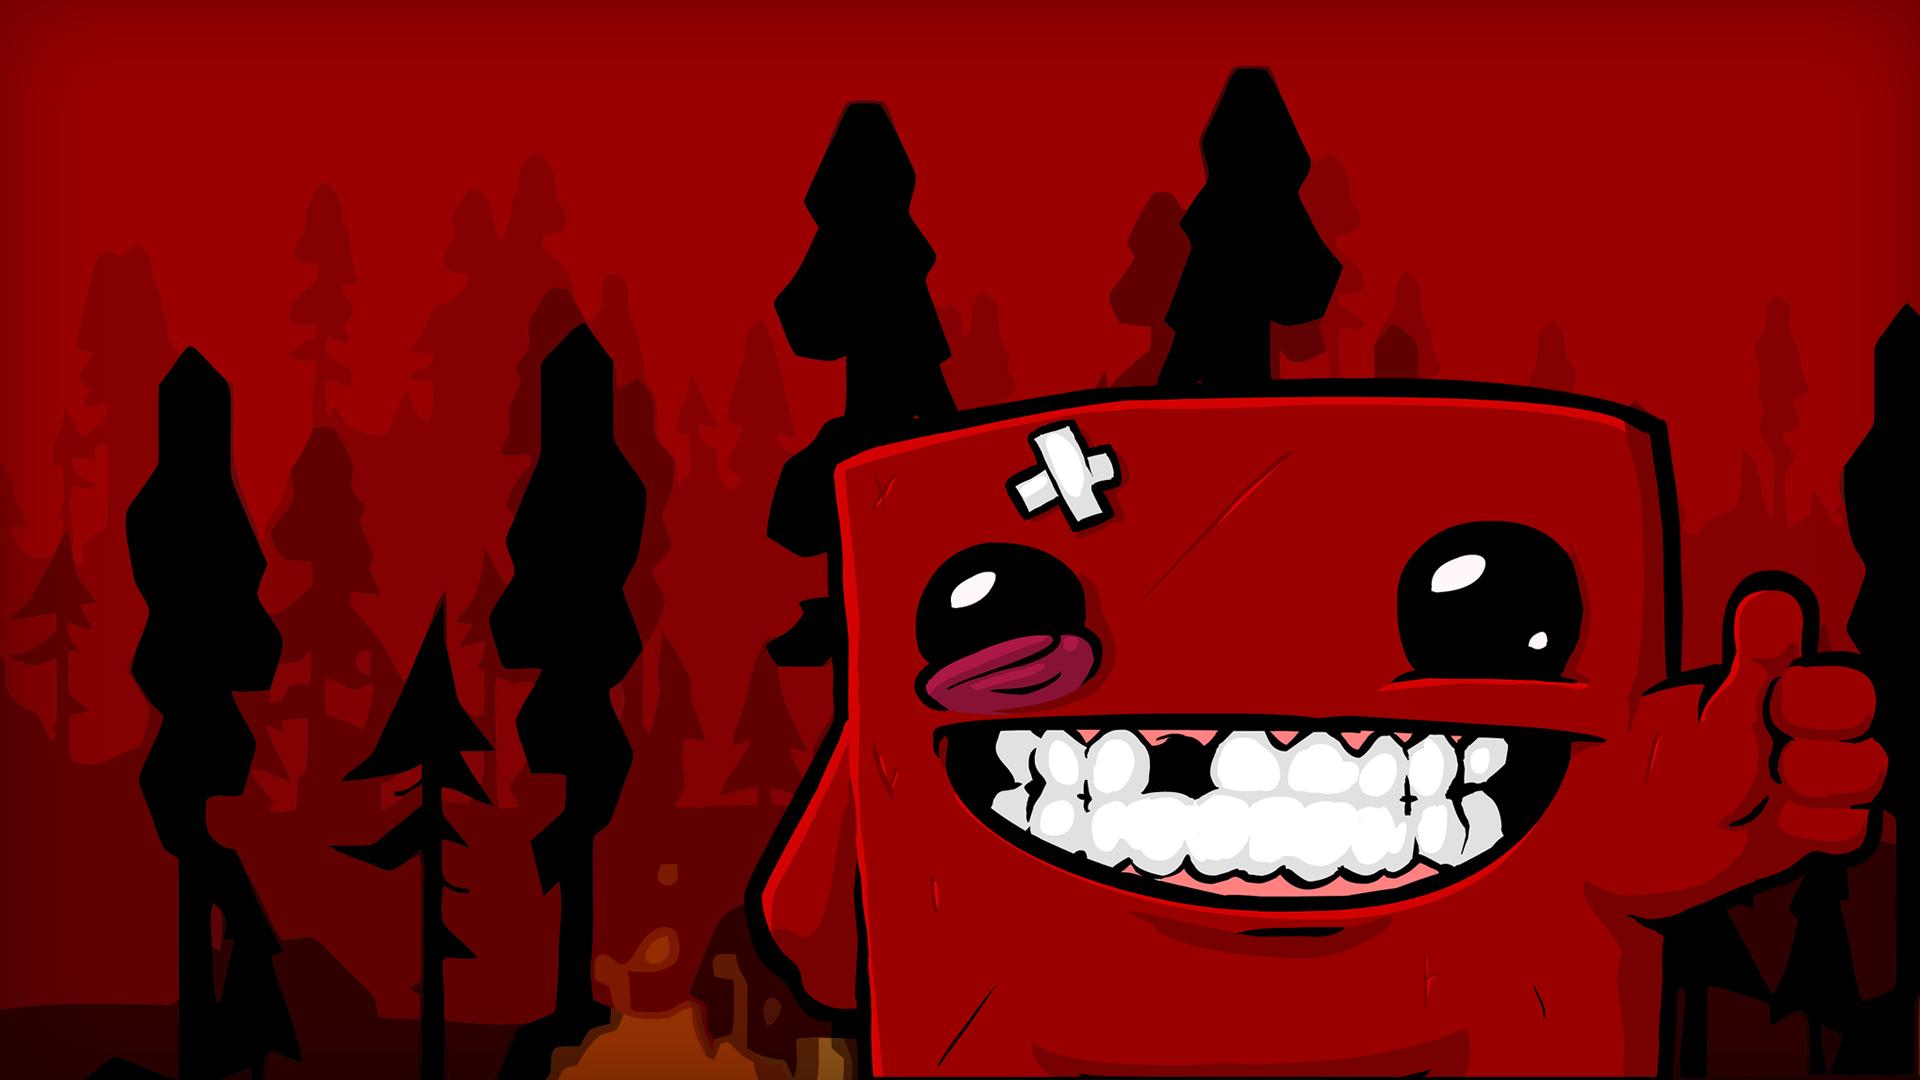 super meat boy forever free